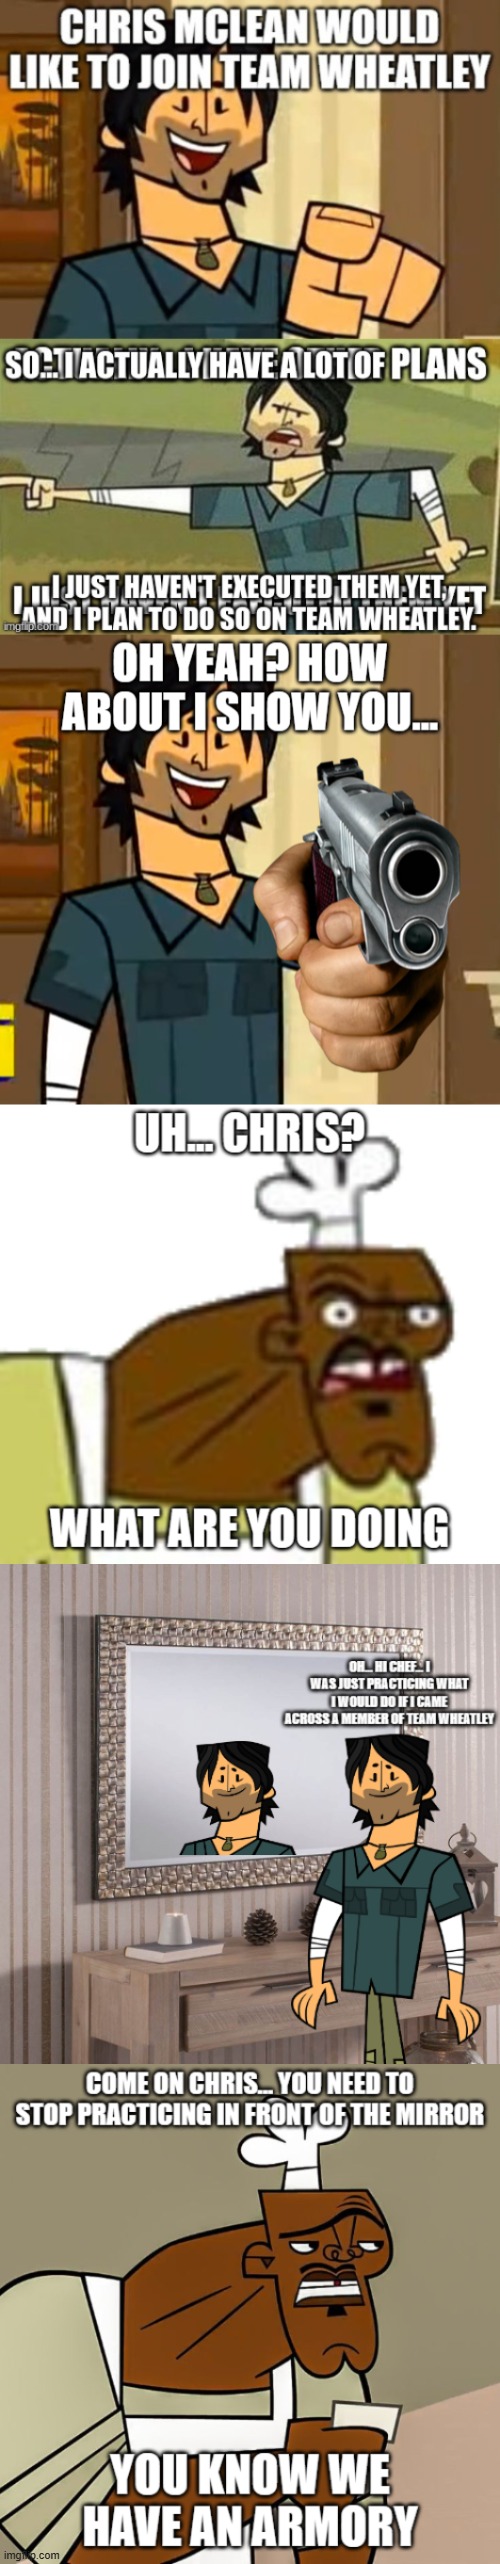 Team Chris will be established shortly | made w/ Imgflip meme maker